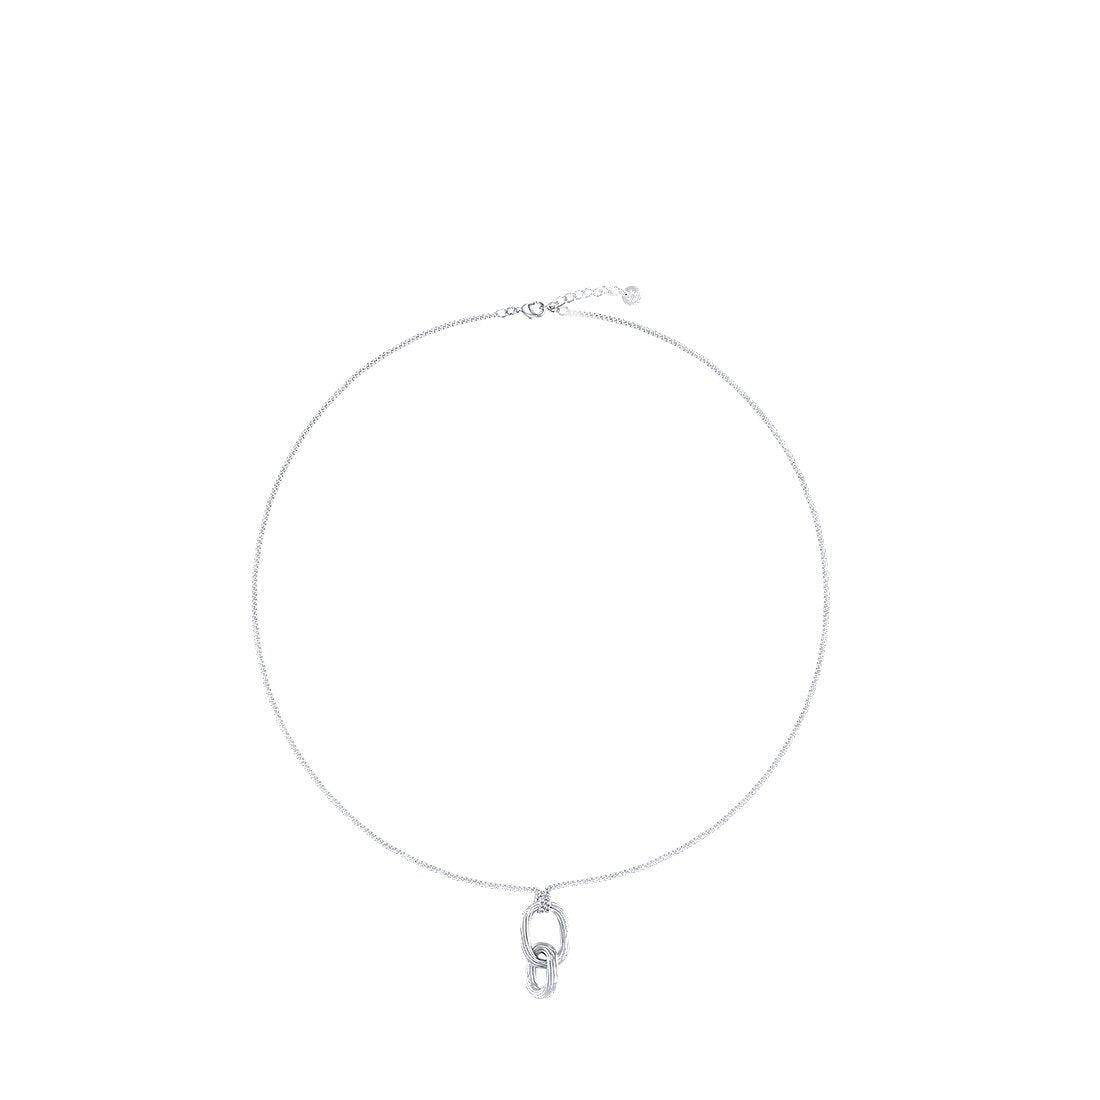 ABYB Real Necklace Sliver | MADA IN CHINA